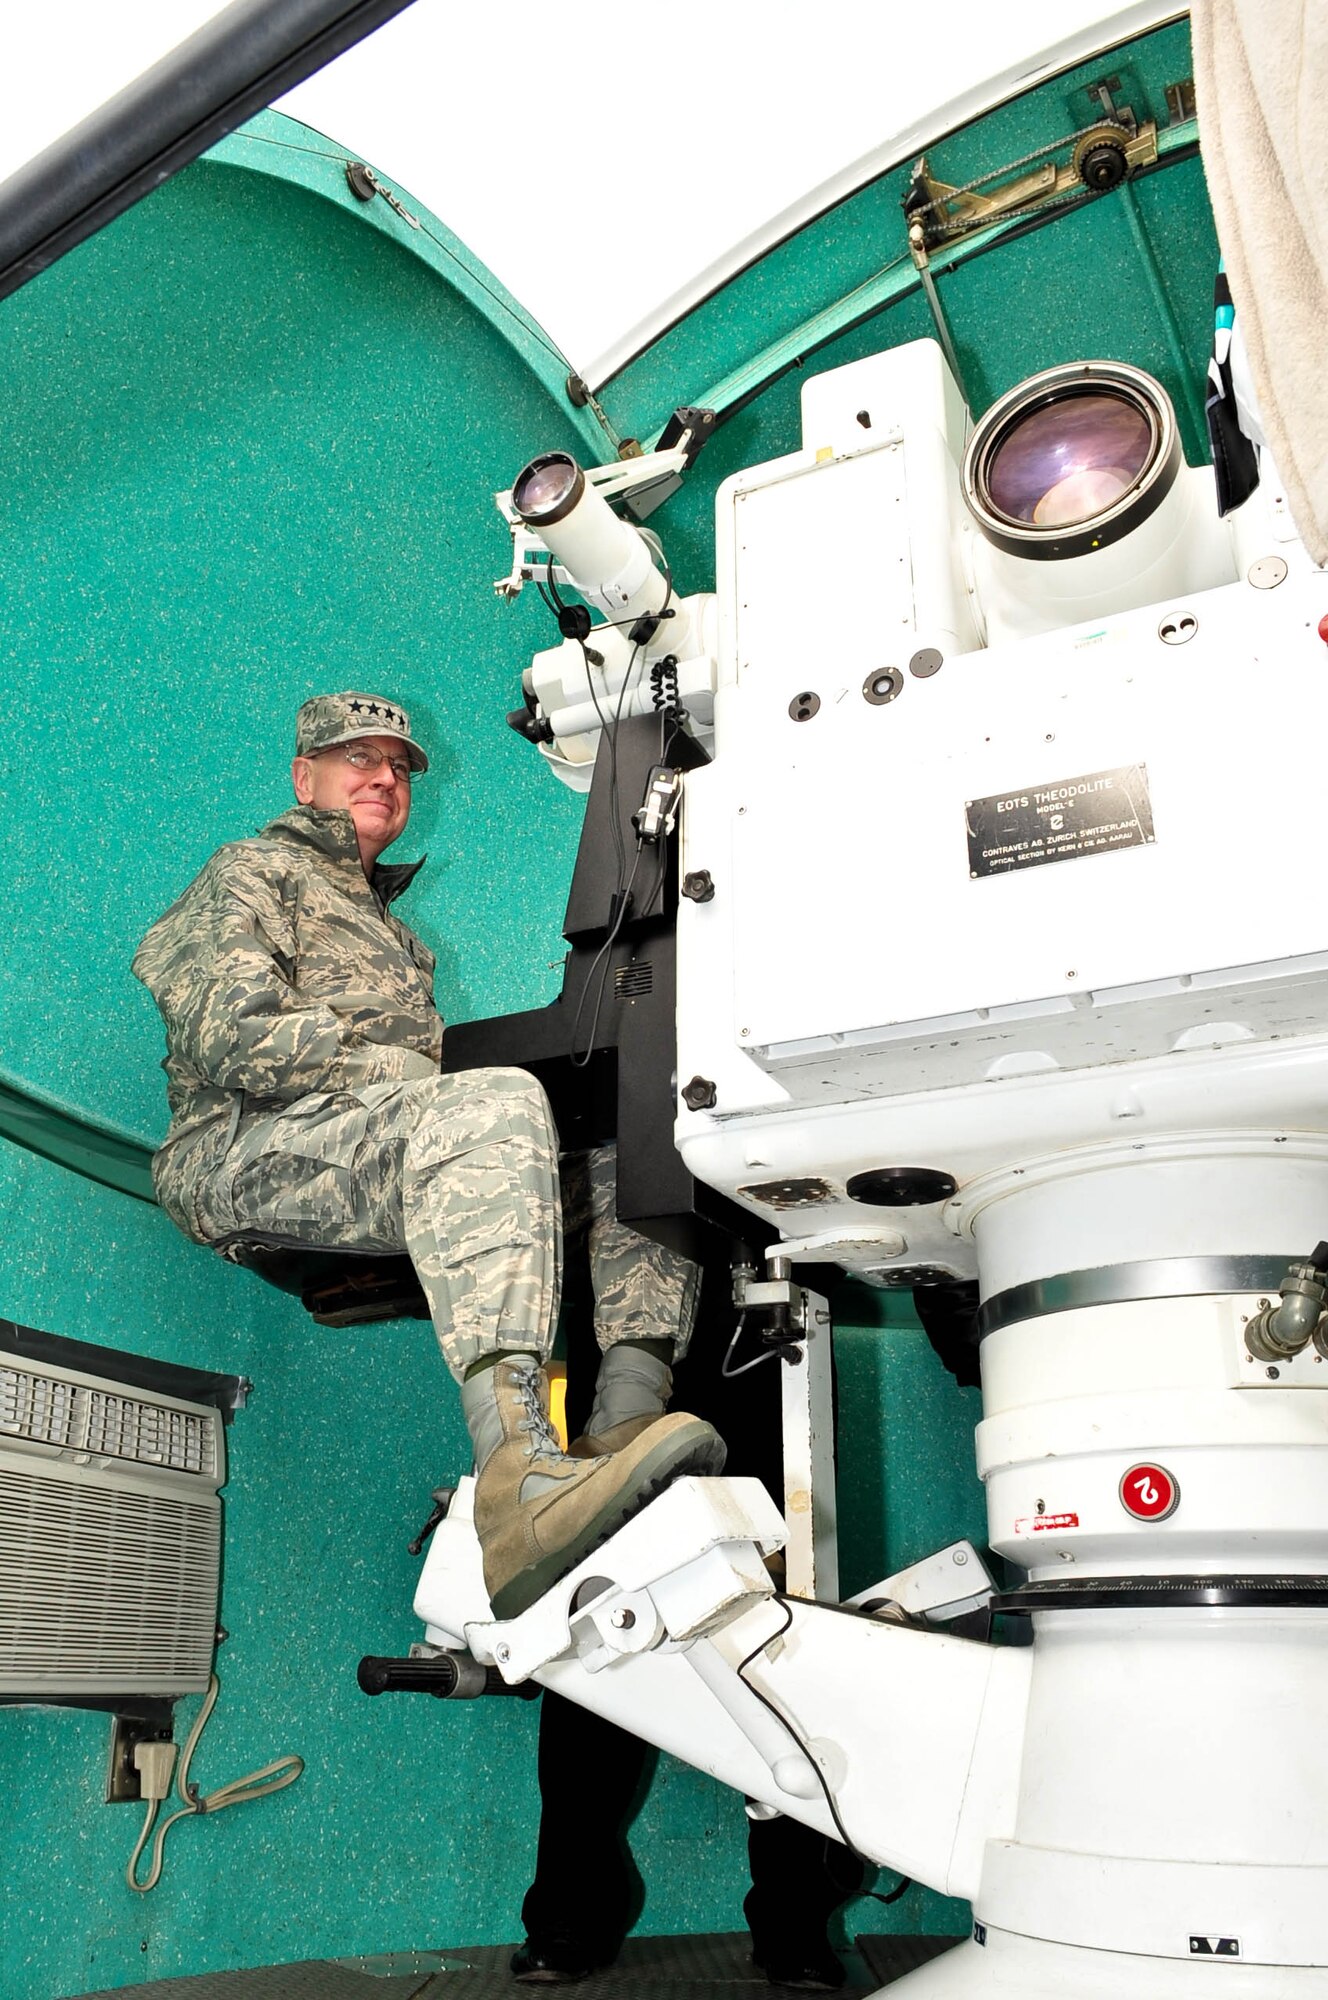 Gen. C. Robert Kehler, commander of Air Force Space Command, sits in a cinetheodolite during a visit to Cape Canaveral Air Force Station Feb. 19. General Kehler visited the Cape on his return to AFSPC headquarters from the Air Warfare Symposium and Technological Exposition in Orlando. Cinetheodolites are used to track the trajectory of a launch vehicle in flight. (U.S. Air Force photo/Jennifer Macklin